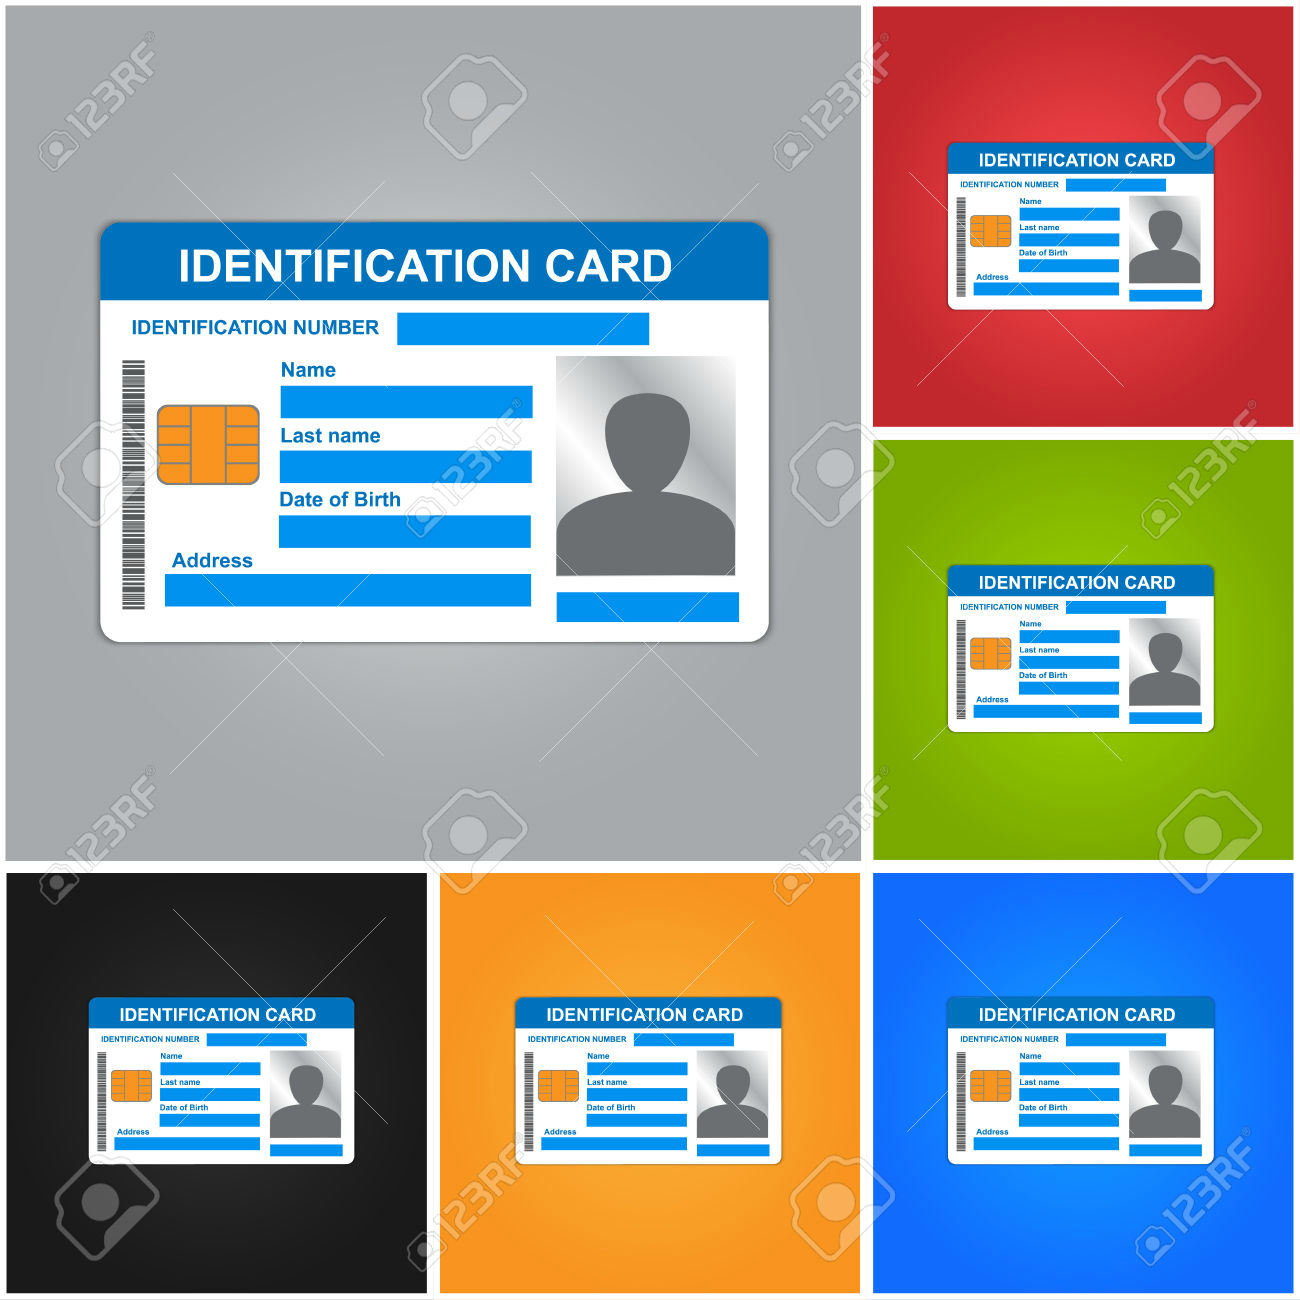 11+ Iconic Student Card Templates – Ai, Psd, Word | Free With Regard To Isic Card Template